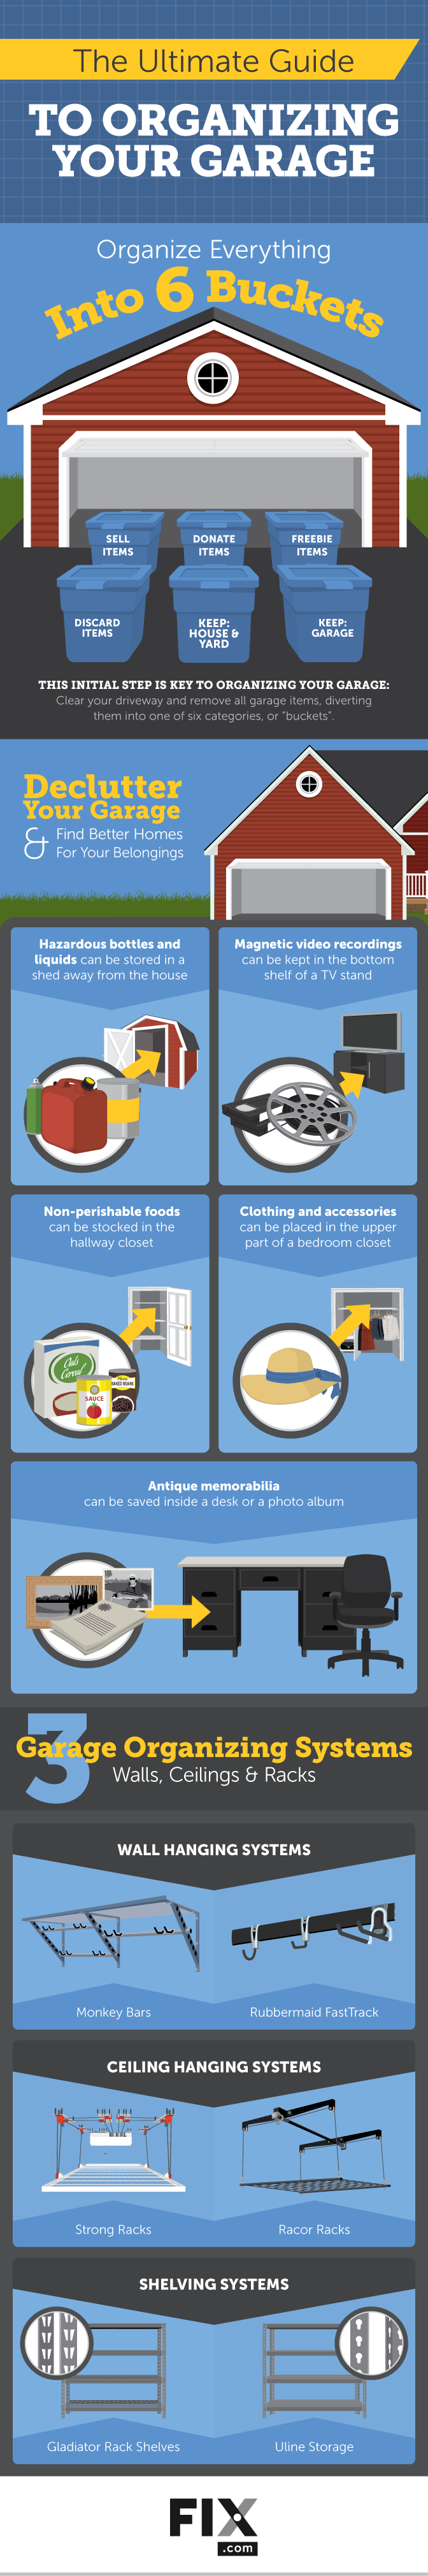 The Ultimate Guide to Organizing Your Garage #infograhic